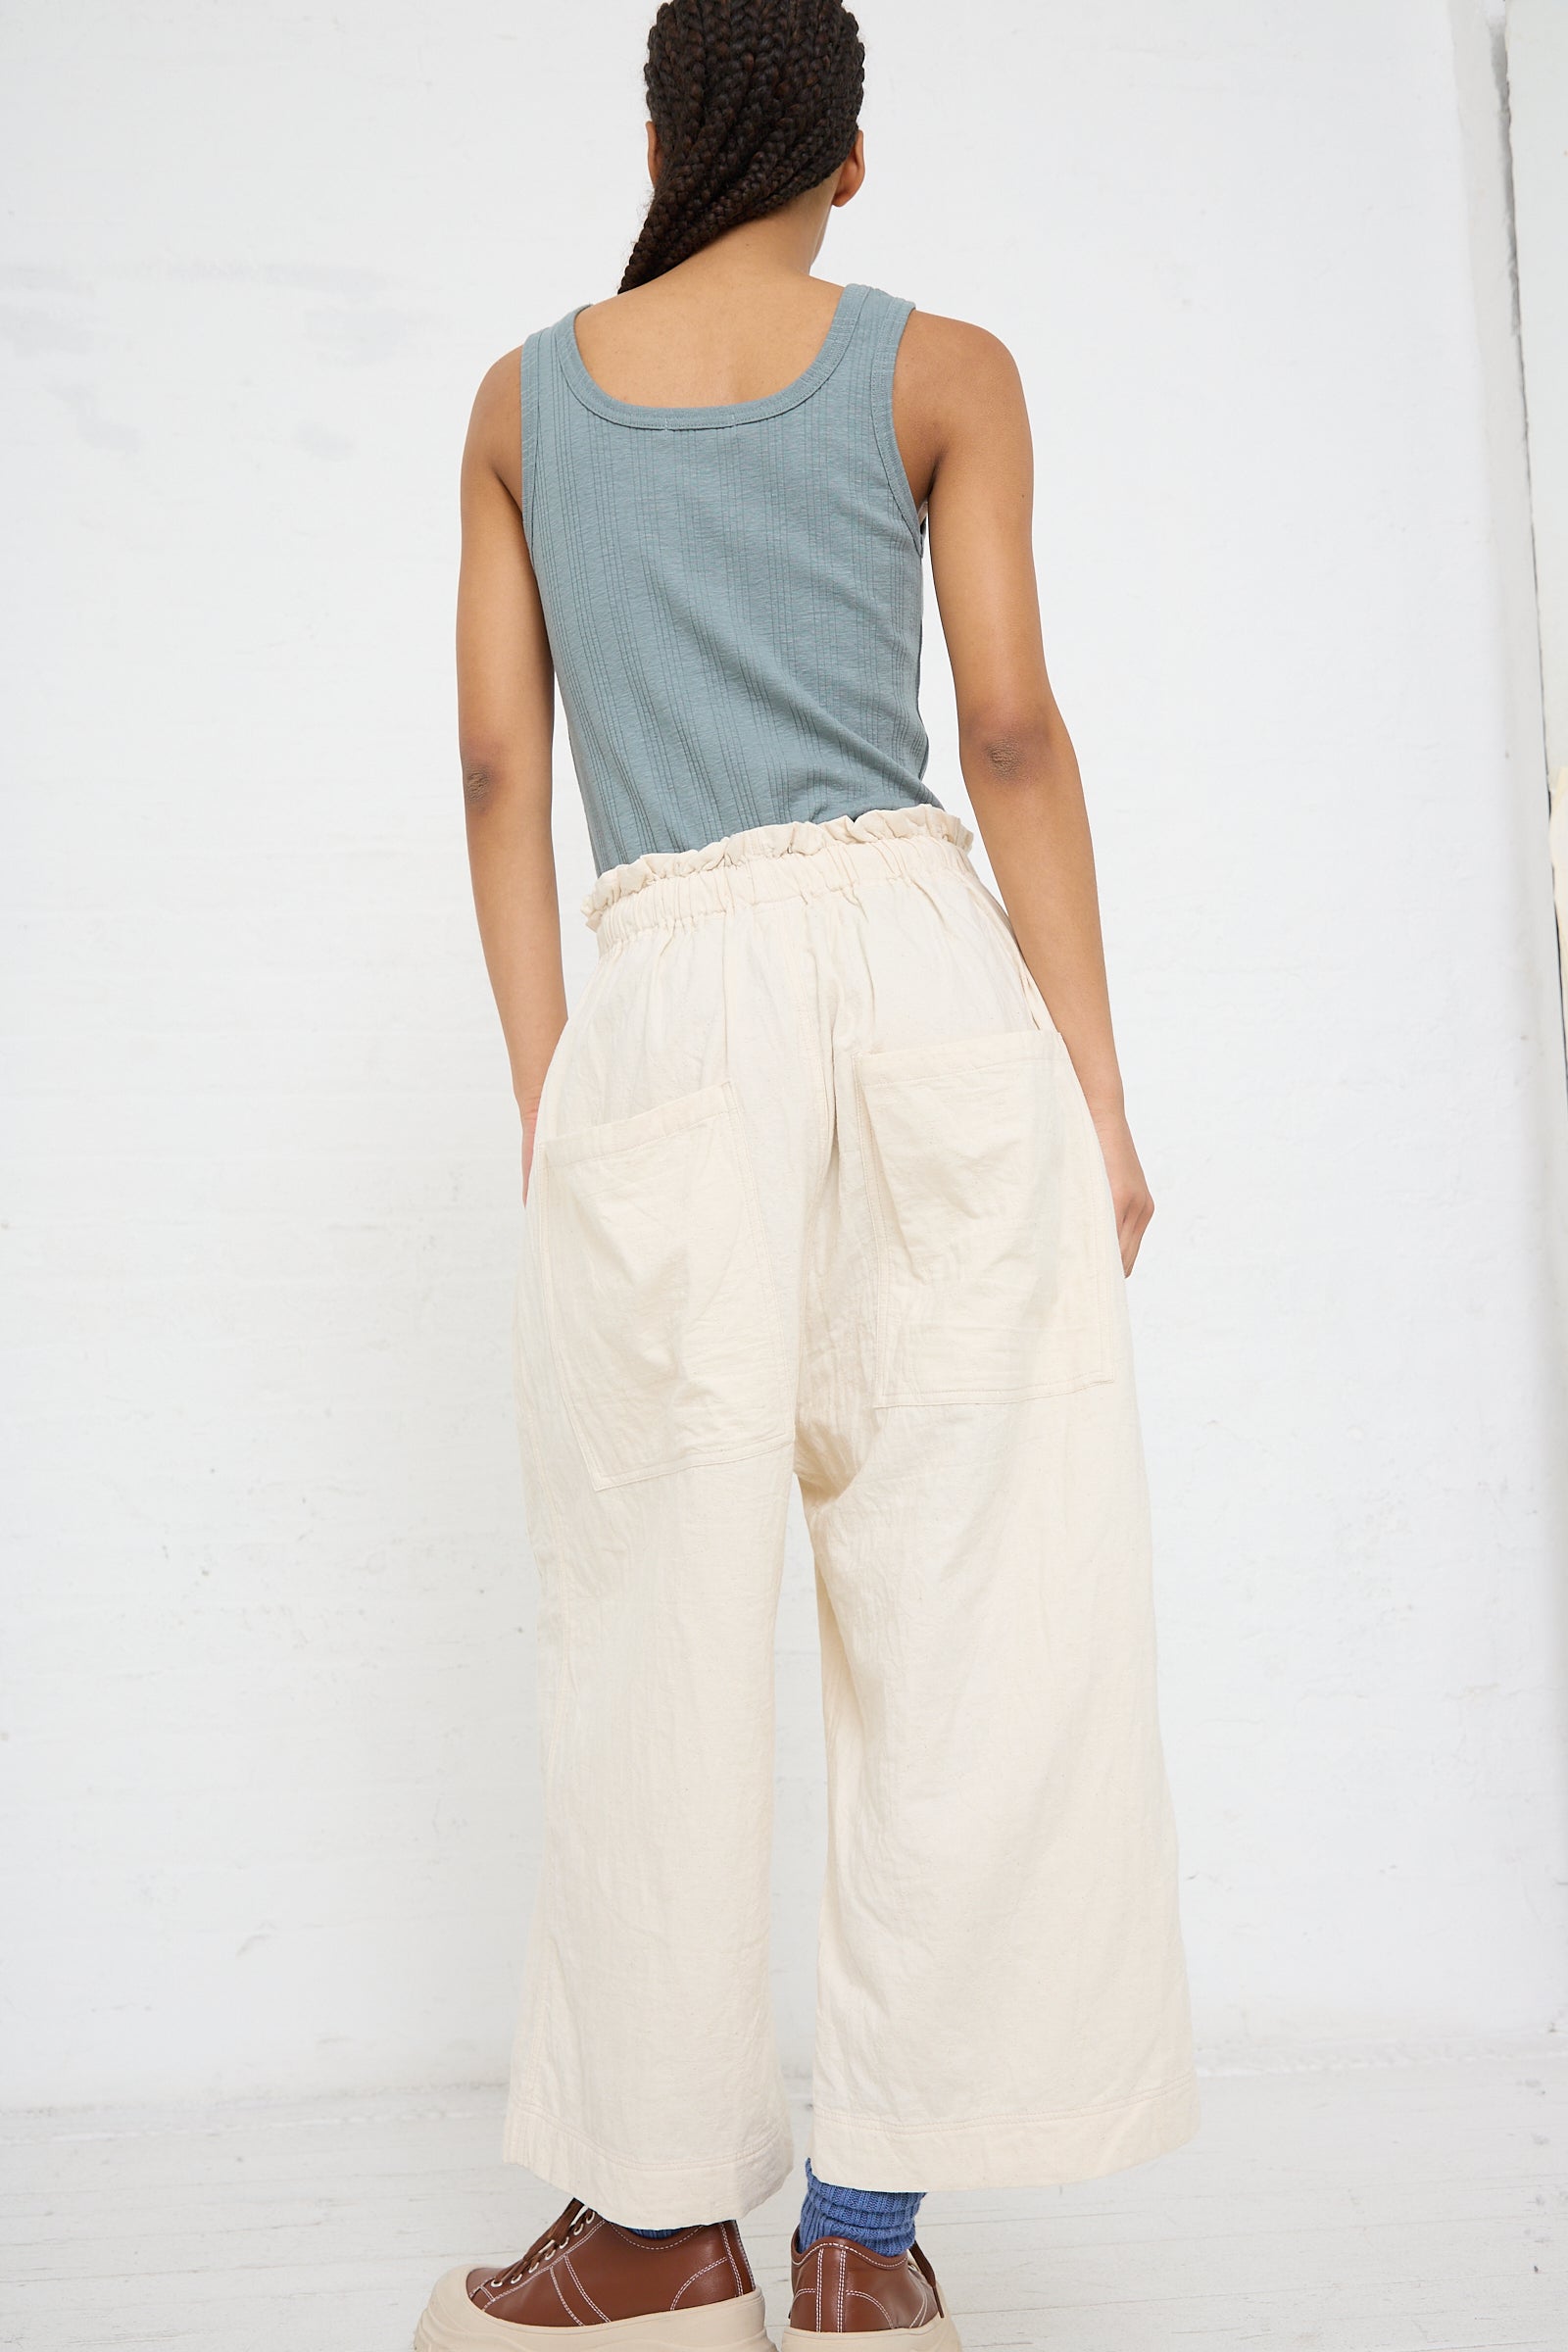 A person seen from behind wearing Azumadaki Cotton Quilt Pant in Ivory by Ichi Antiquités, a blue tank top, and brown shoes.